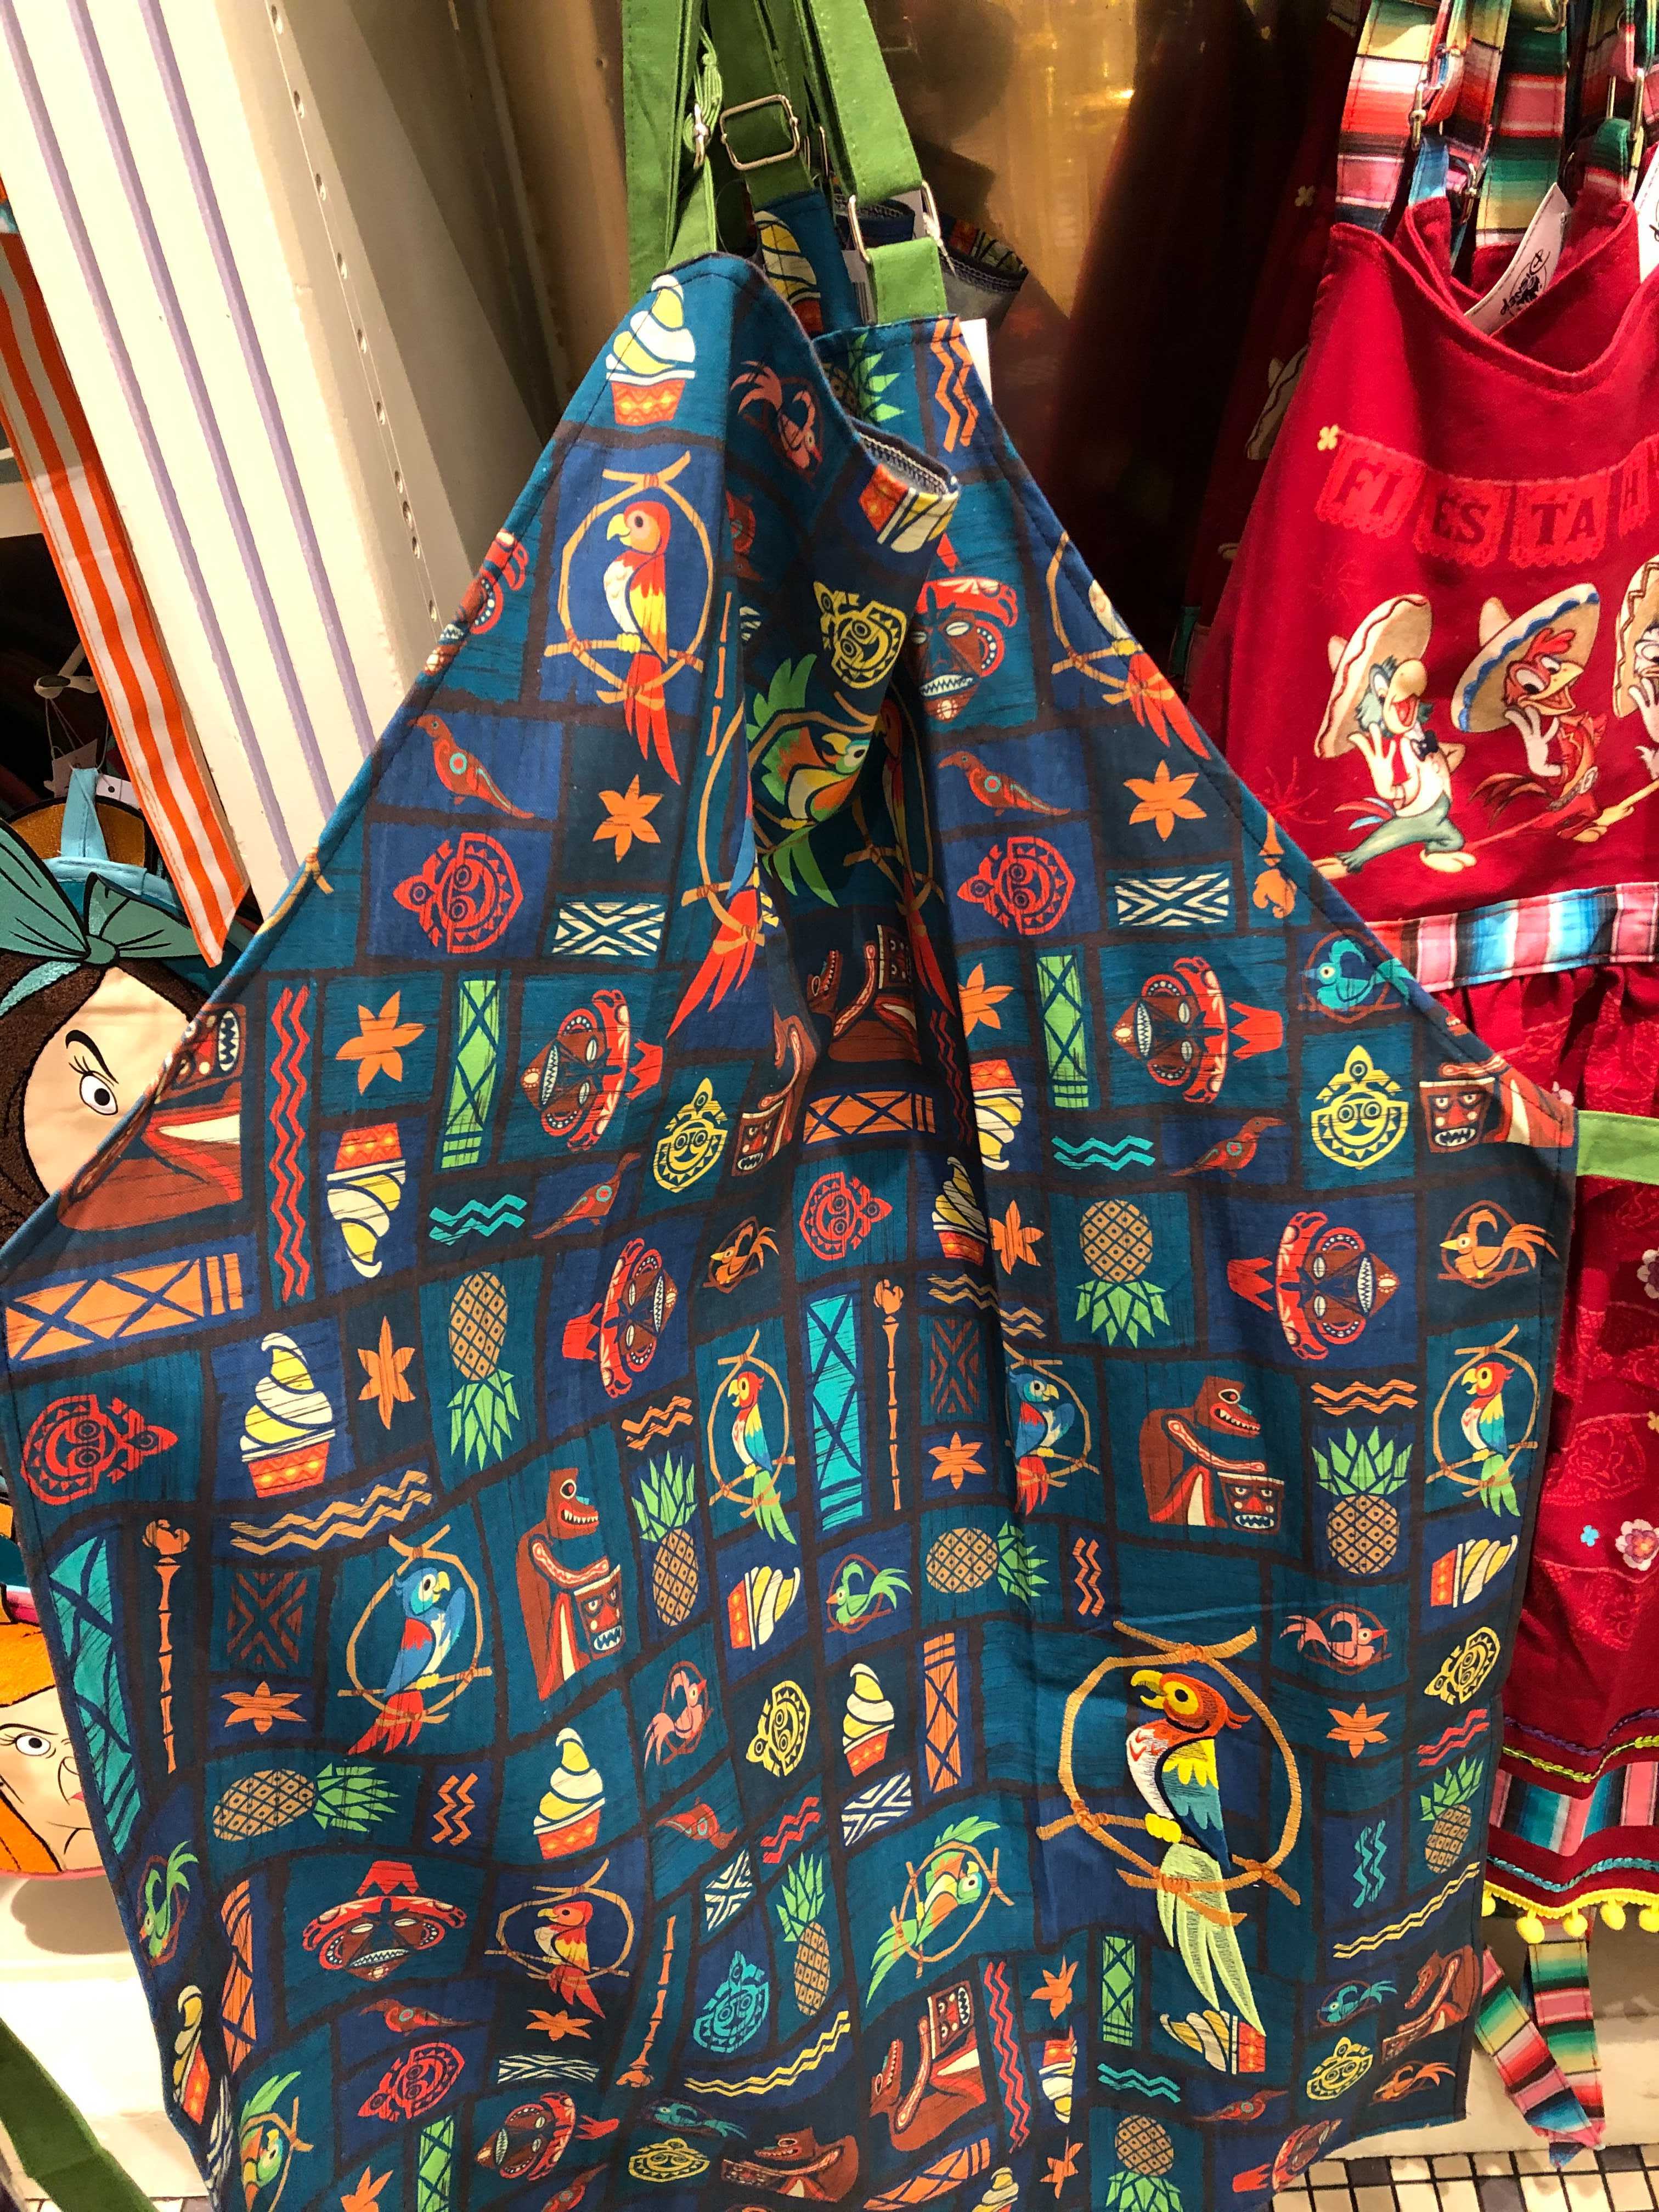 https://touringplans.com/blog/new-disney-parks-attractions-kitchen-towels-and-aprons-that-every-fan-loves/enchanted-tiki-room-apron/